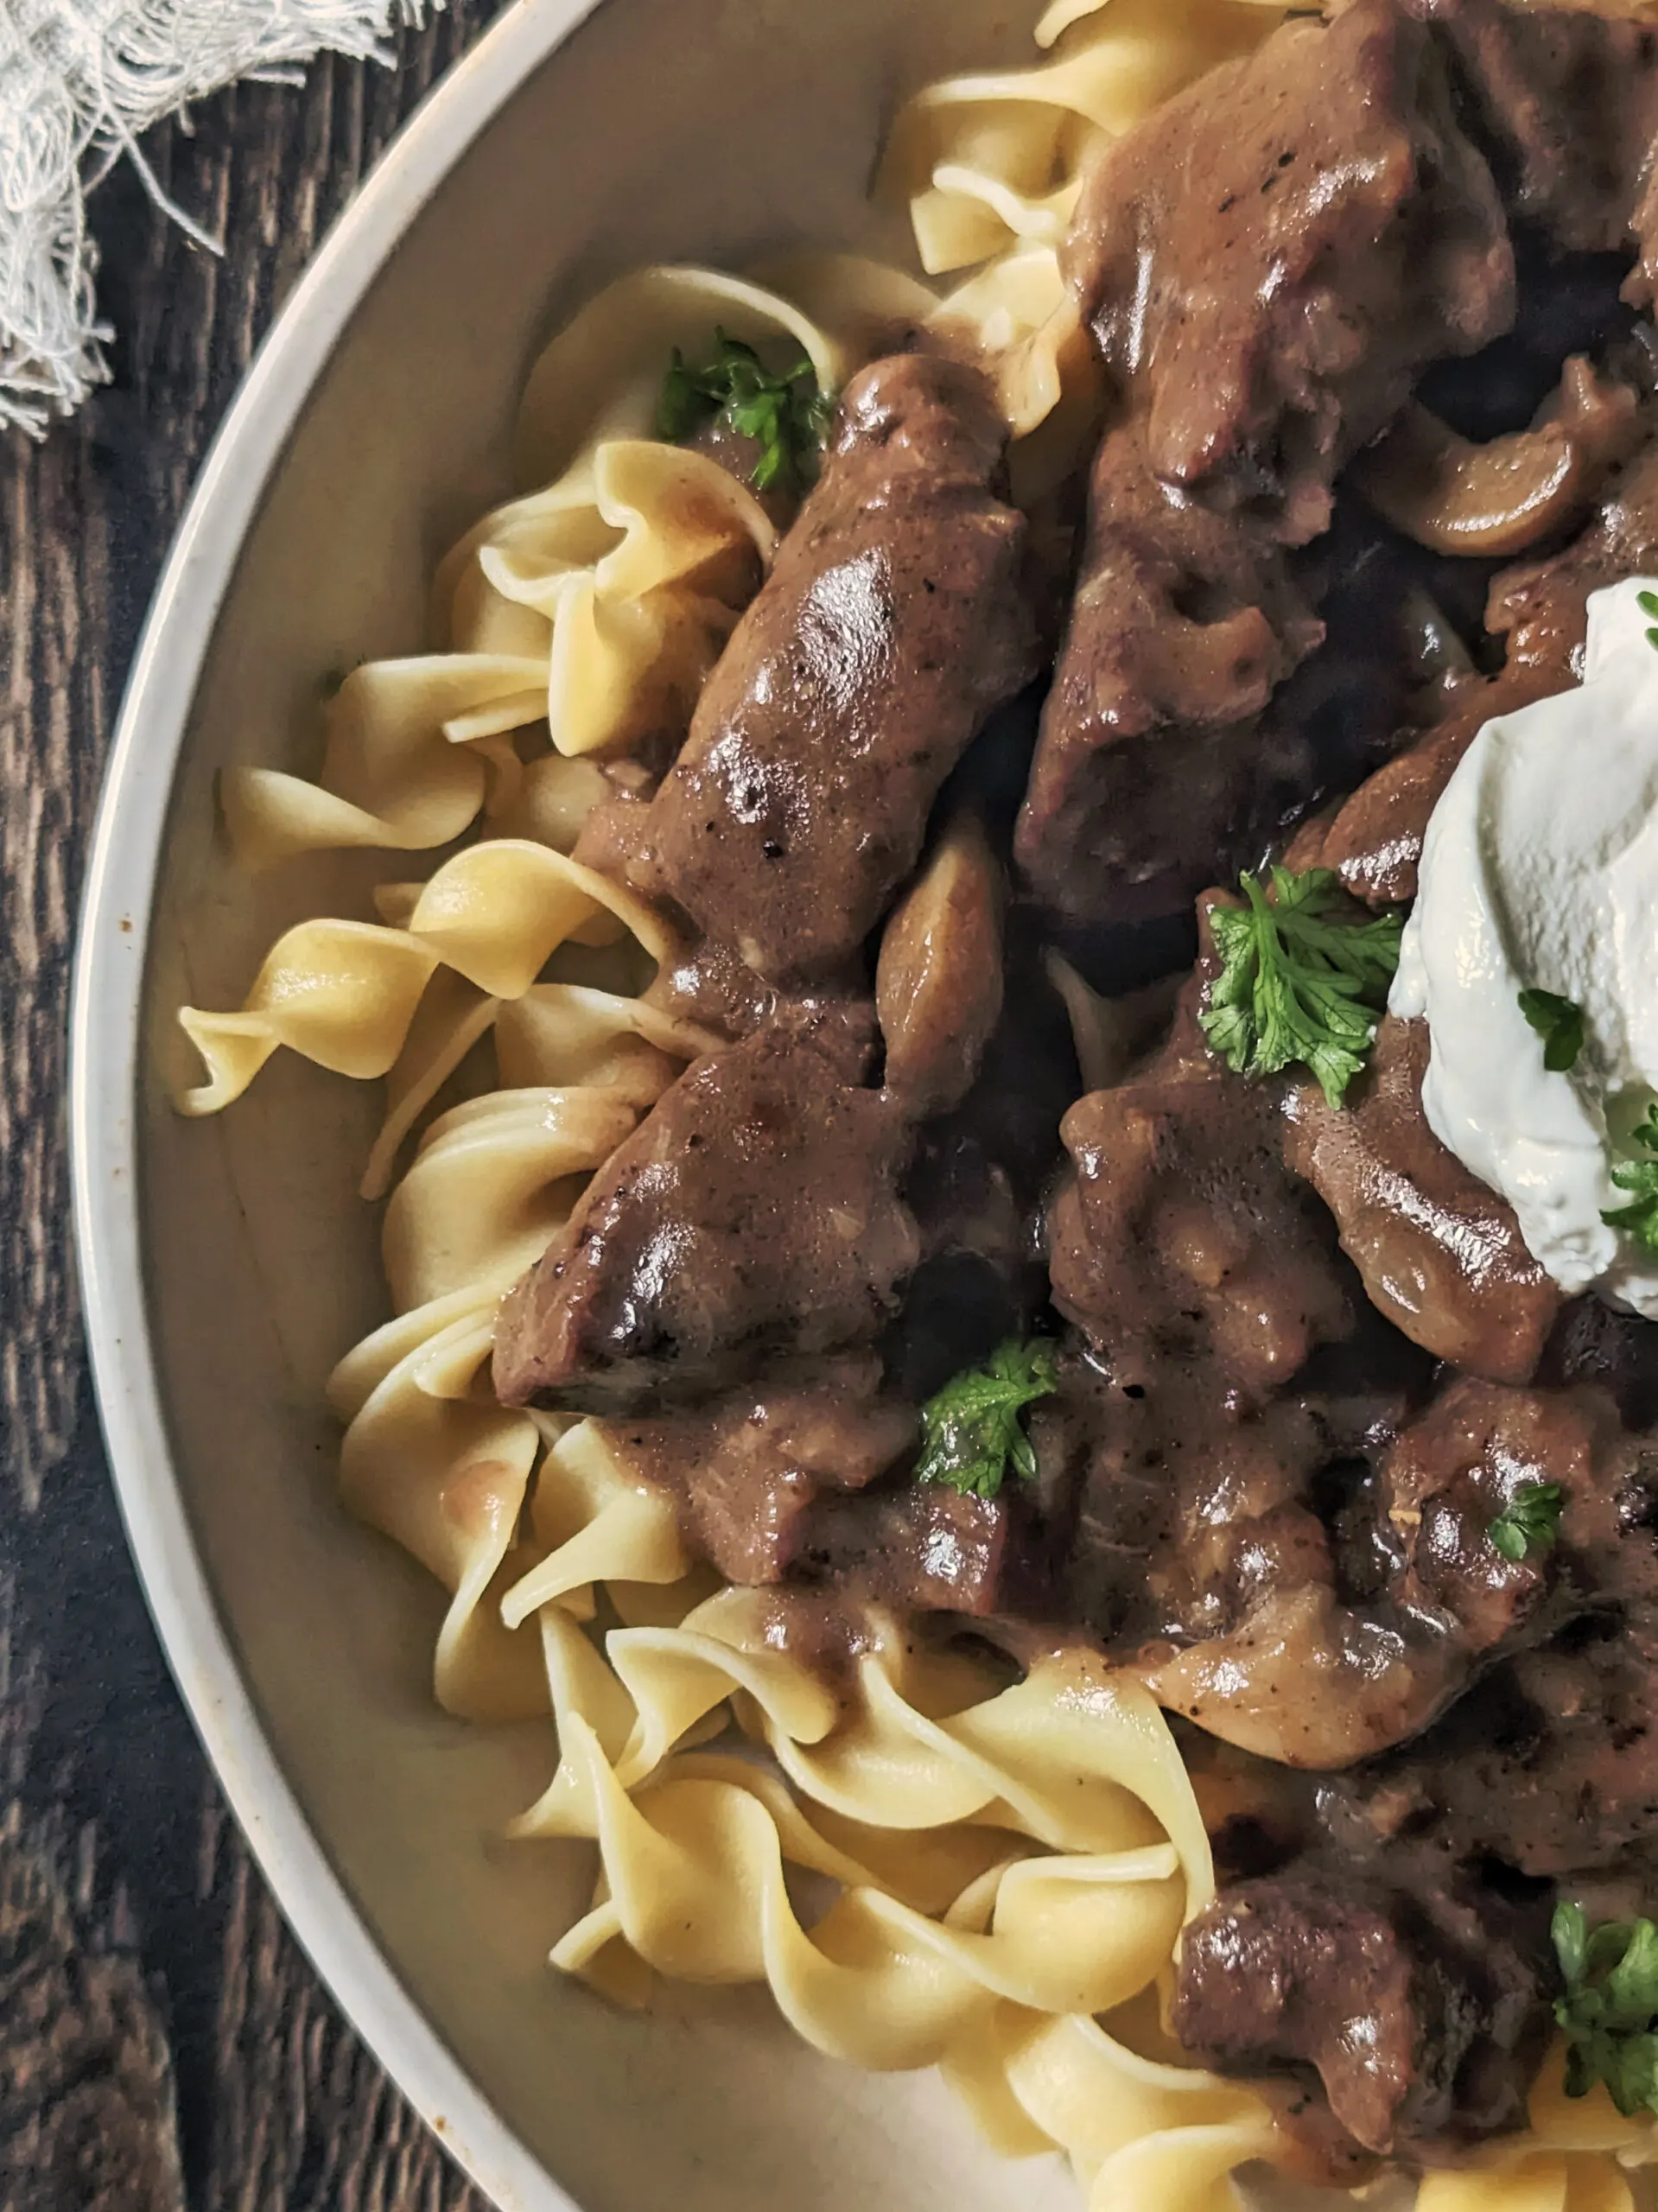 Buttered noodles topped with easy beef stroganoff and garnished with fresh parsley and sour cream.